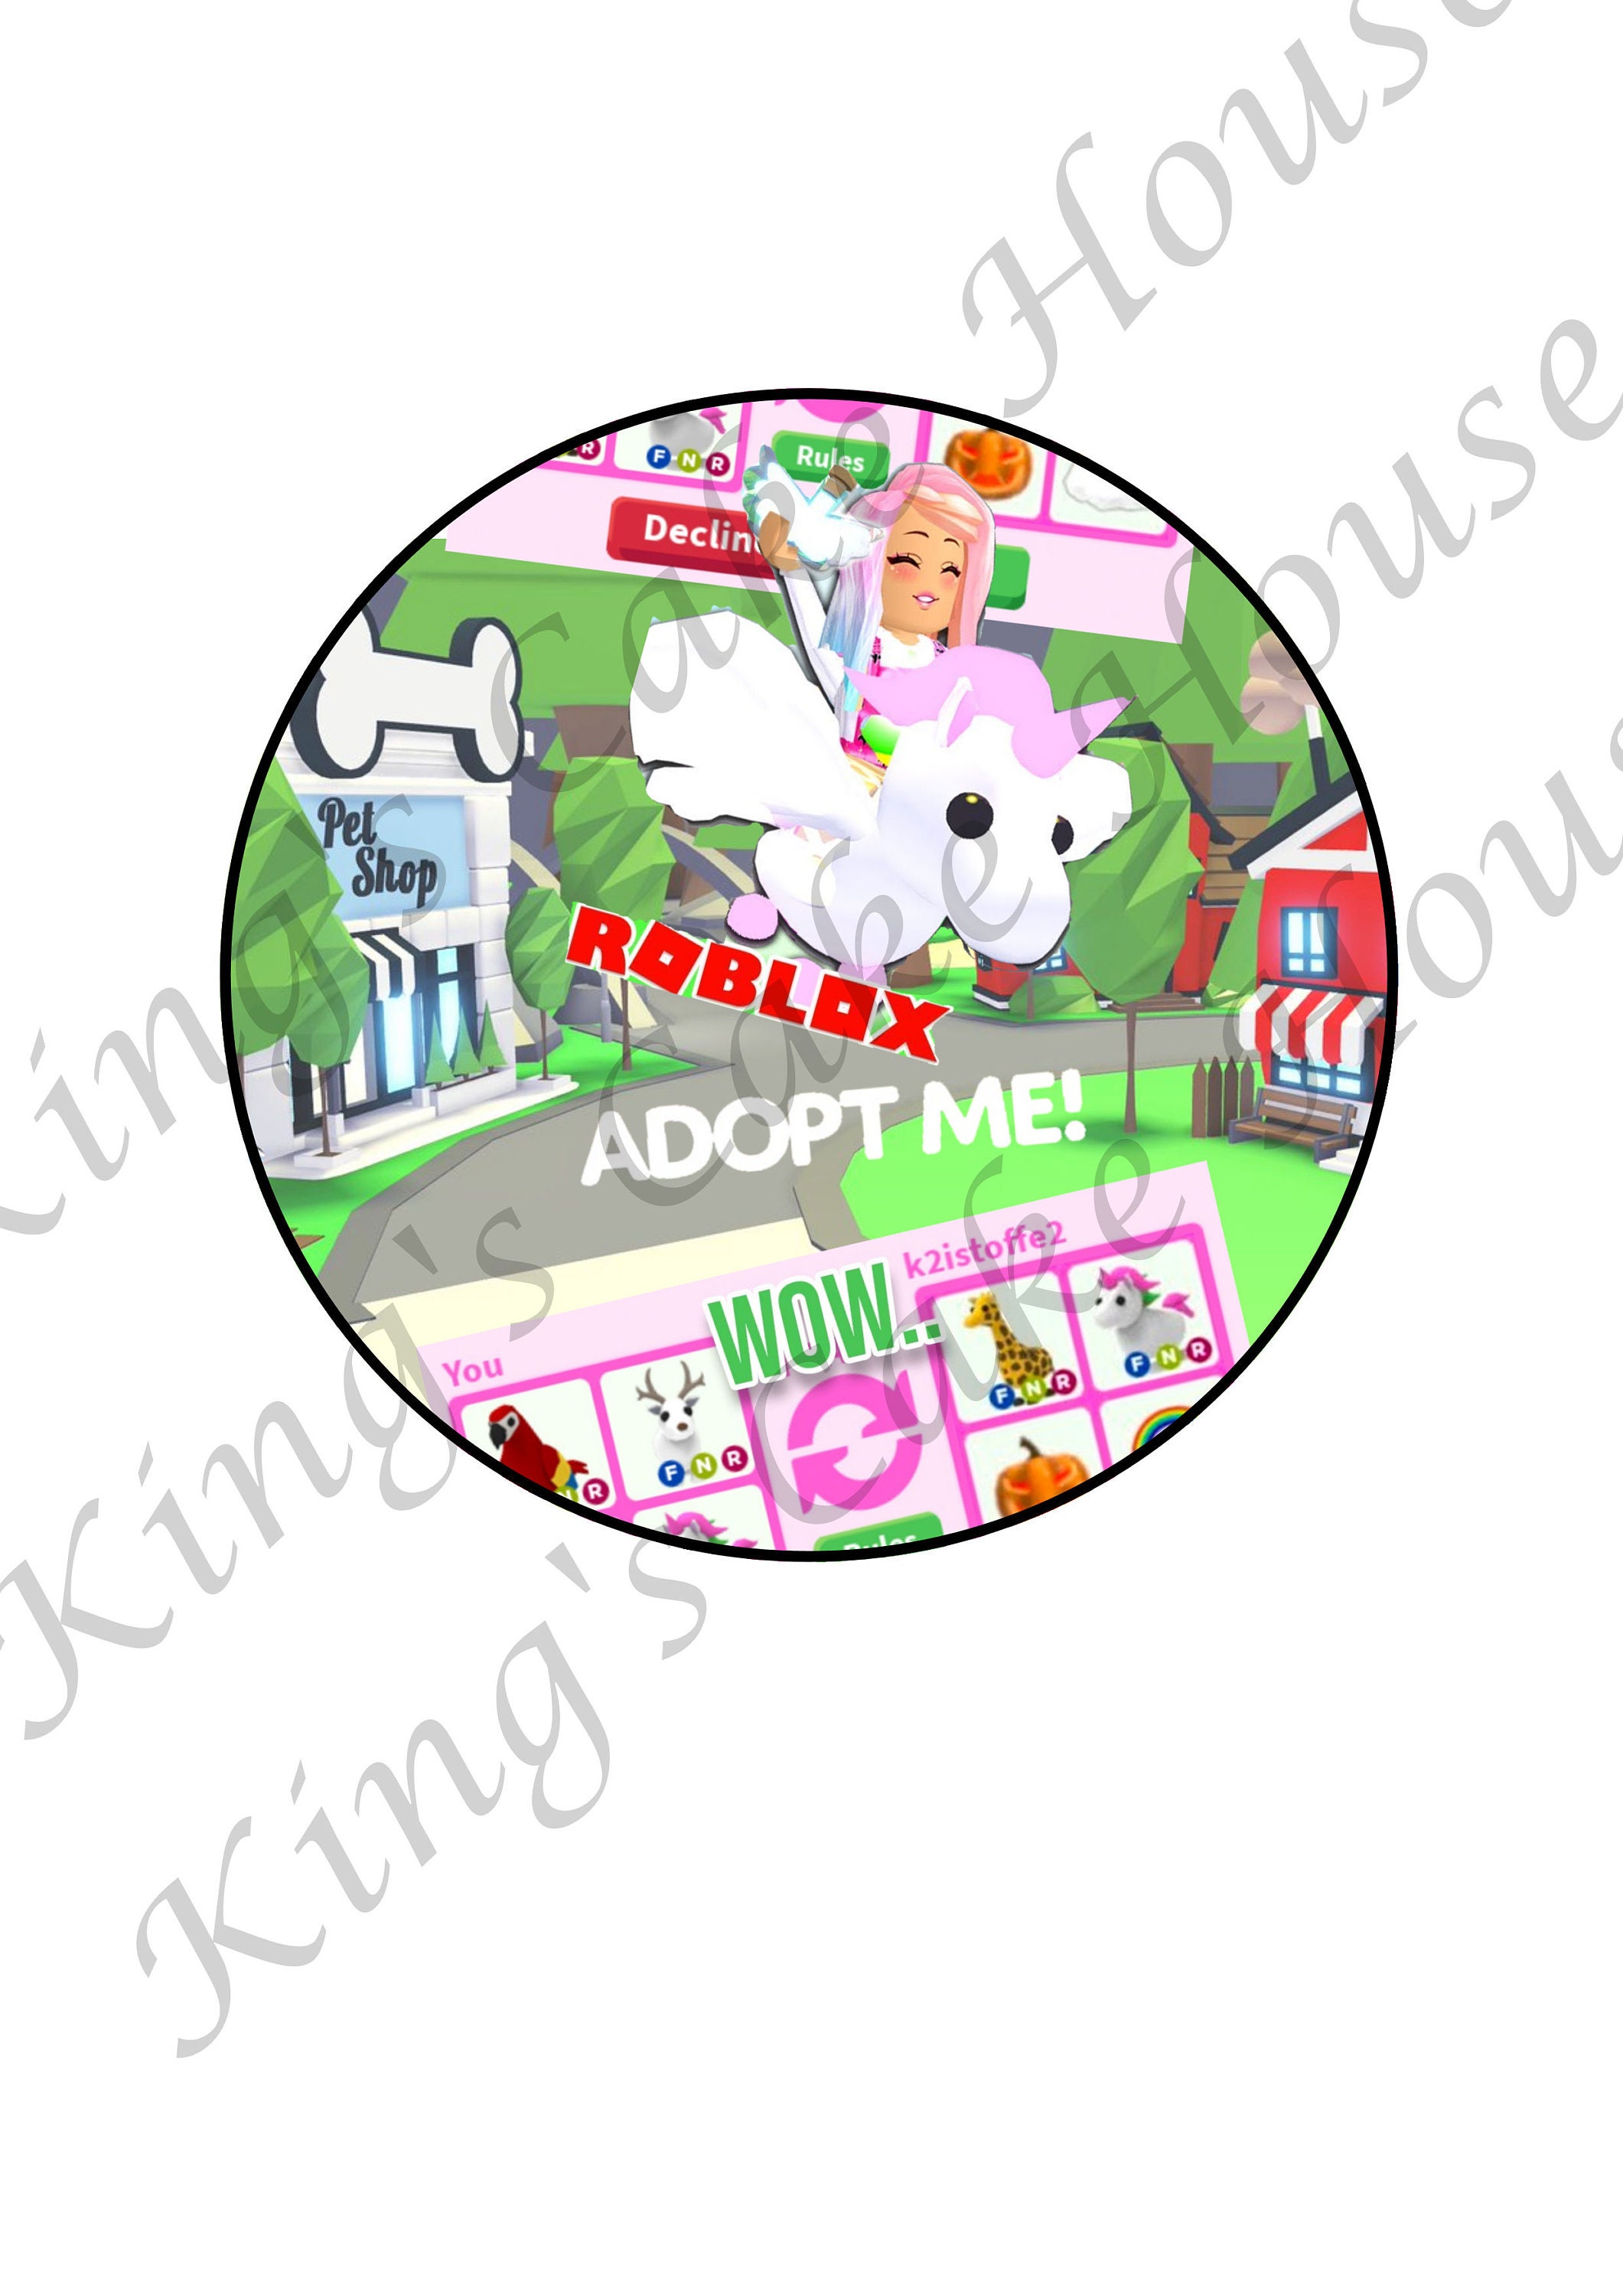 Roblox ADOPT ME Edible image birthday cake topper frosting sheet FAST SHIPPING!